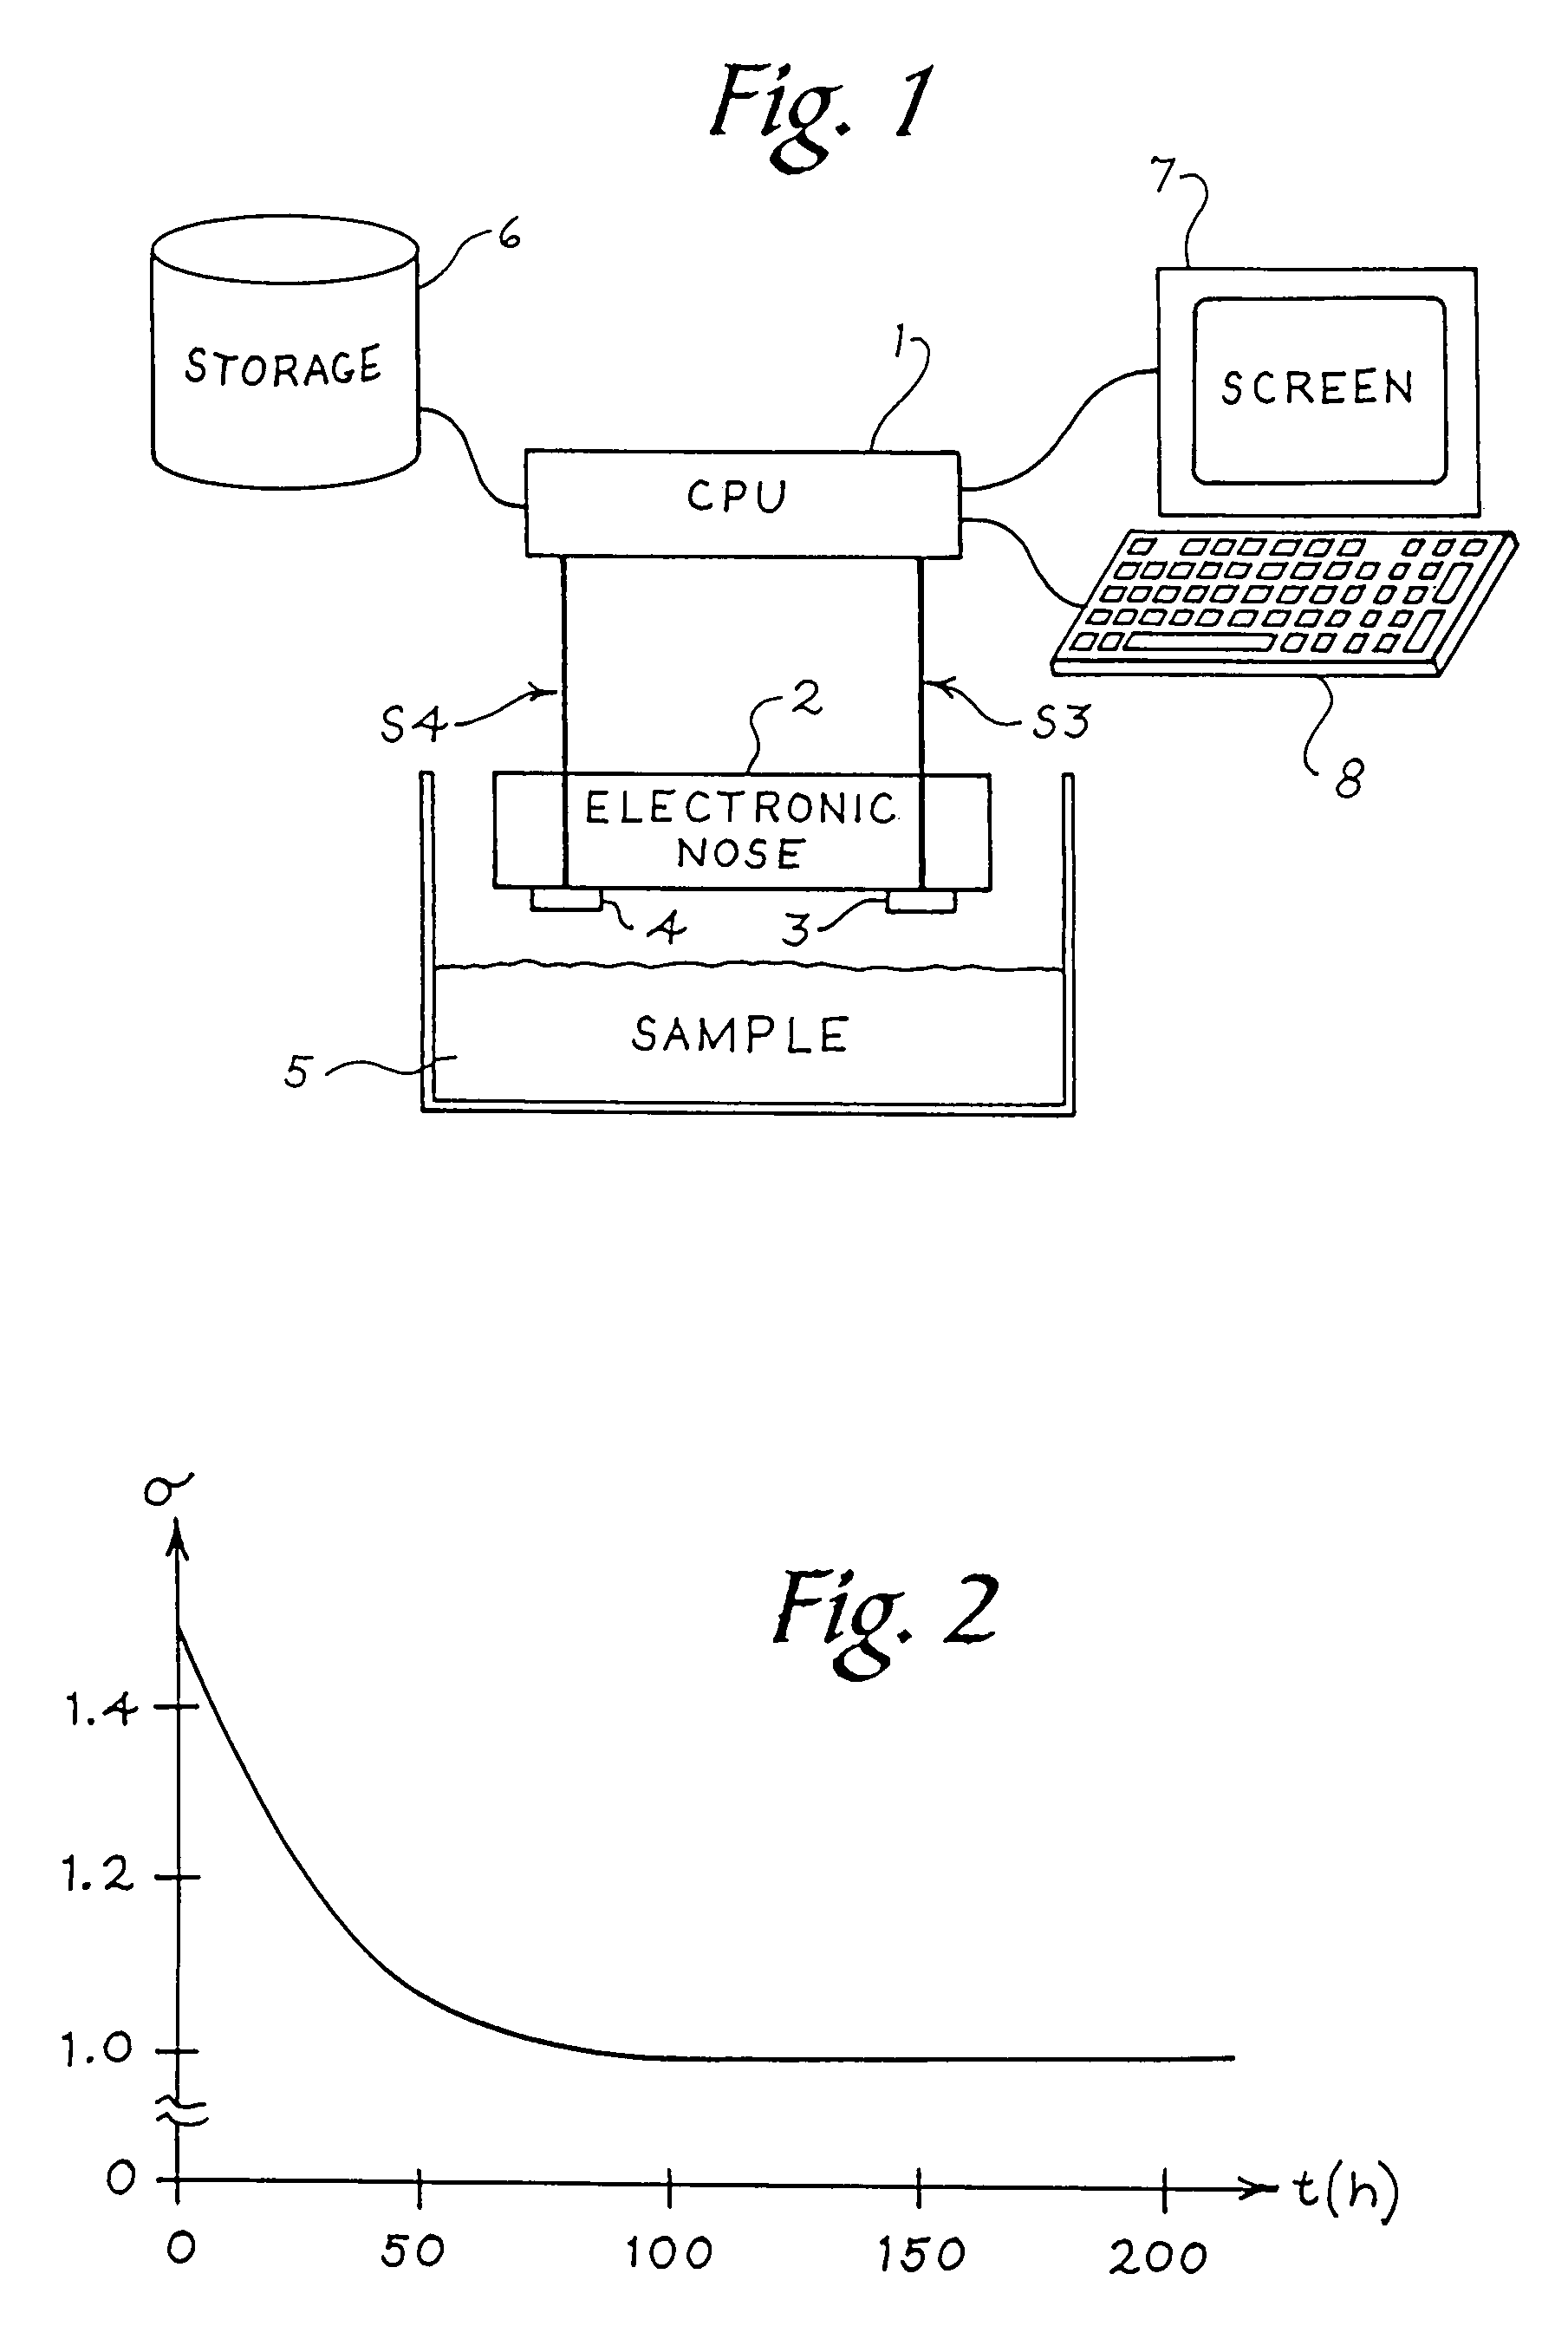 Determination of the age, identification and sealing of a product containing volatile components